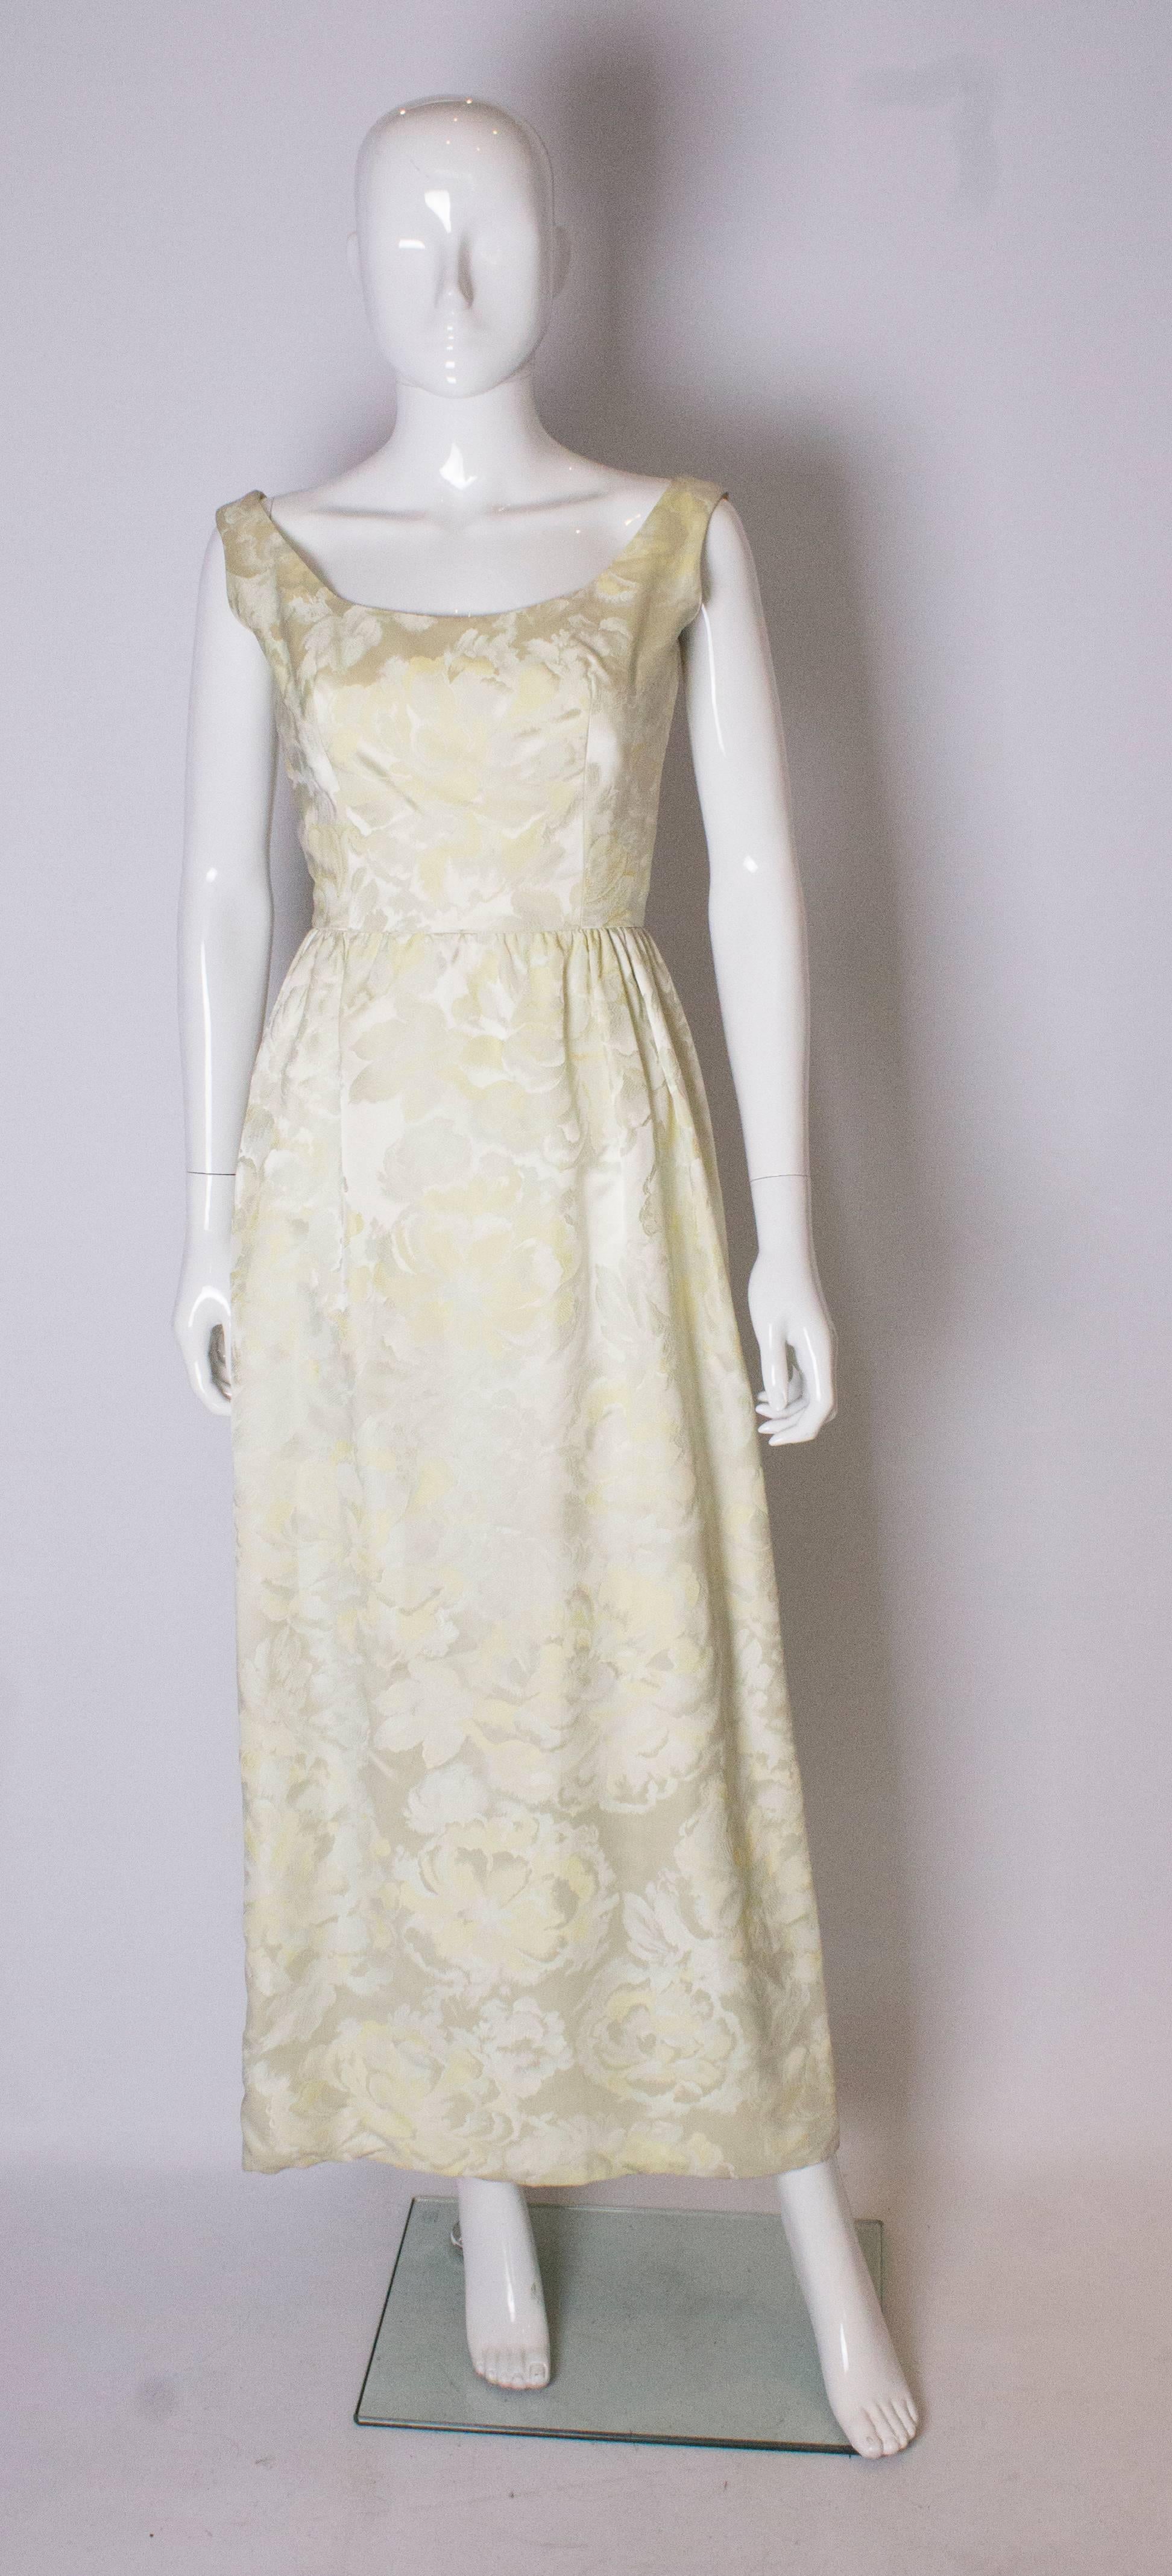 A stunning gown by US designer Sarmi, ideal for Spring/Summer. The gown has a deep neckline at the front  and back, and is in a pale yellow , floral print brocade fabric. The dress is i fully lined and has a central back zip.